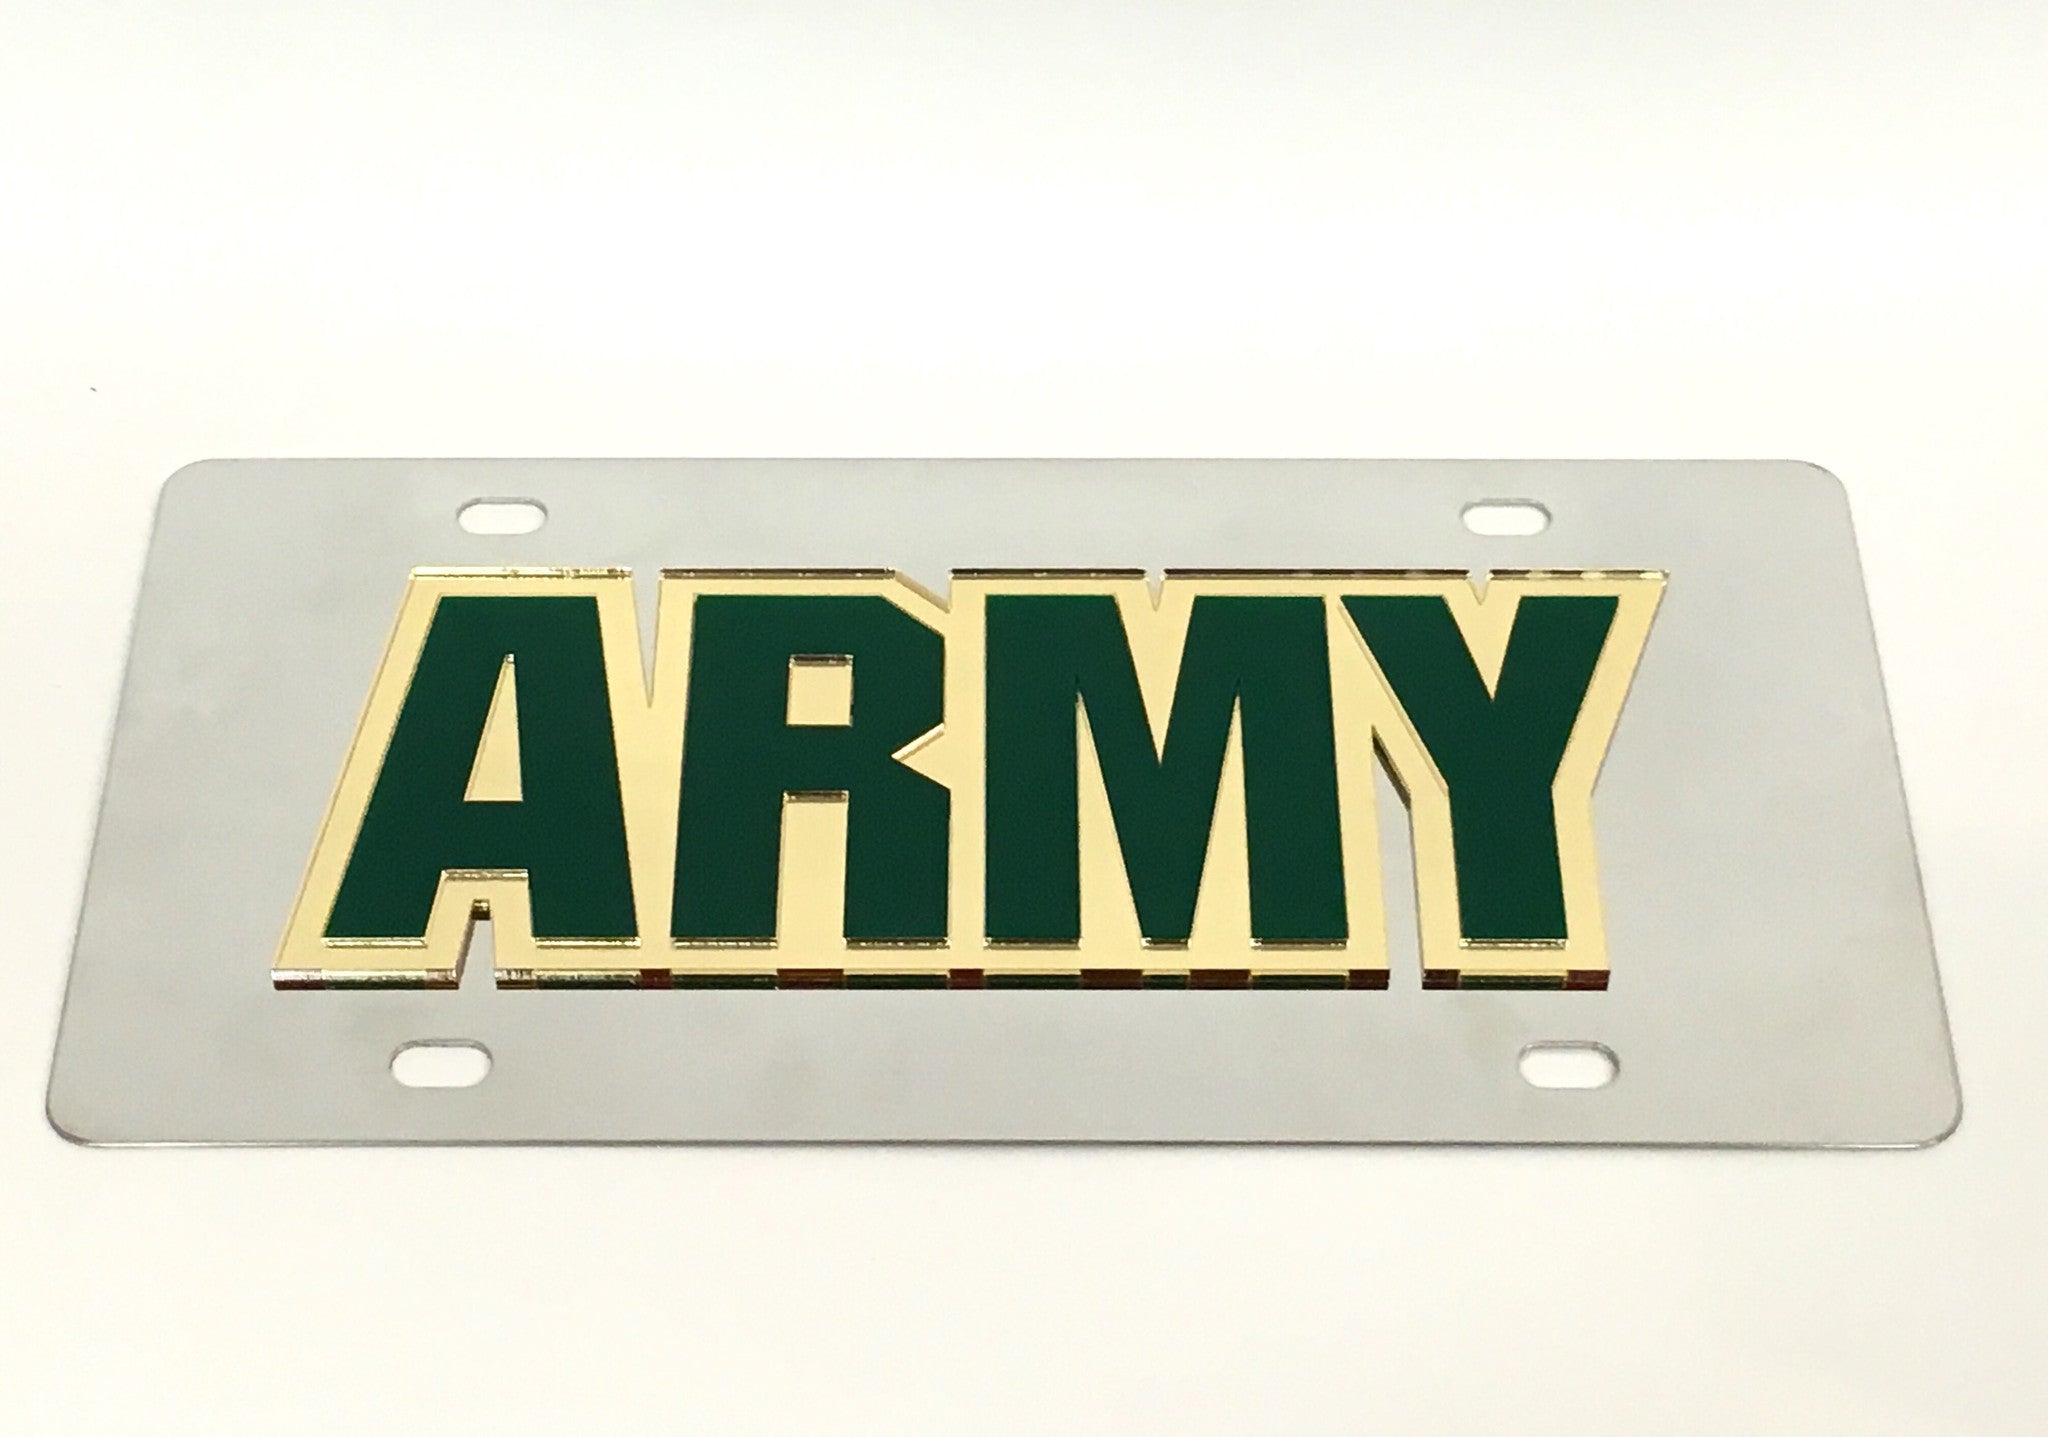 U.S. Army Stainless Steel License Plate